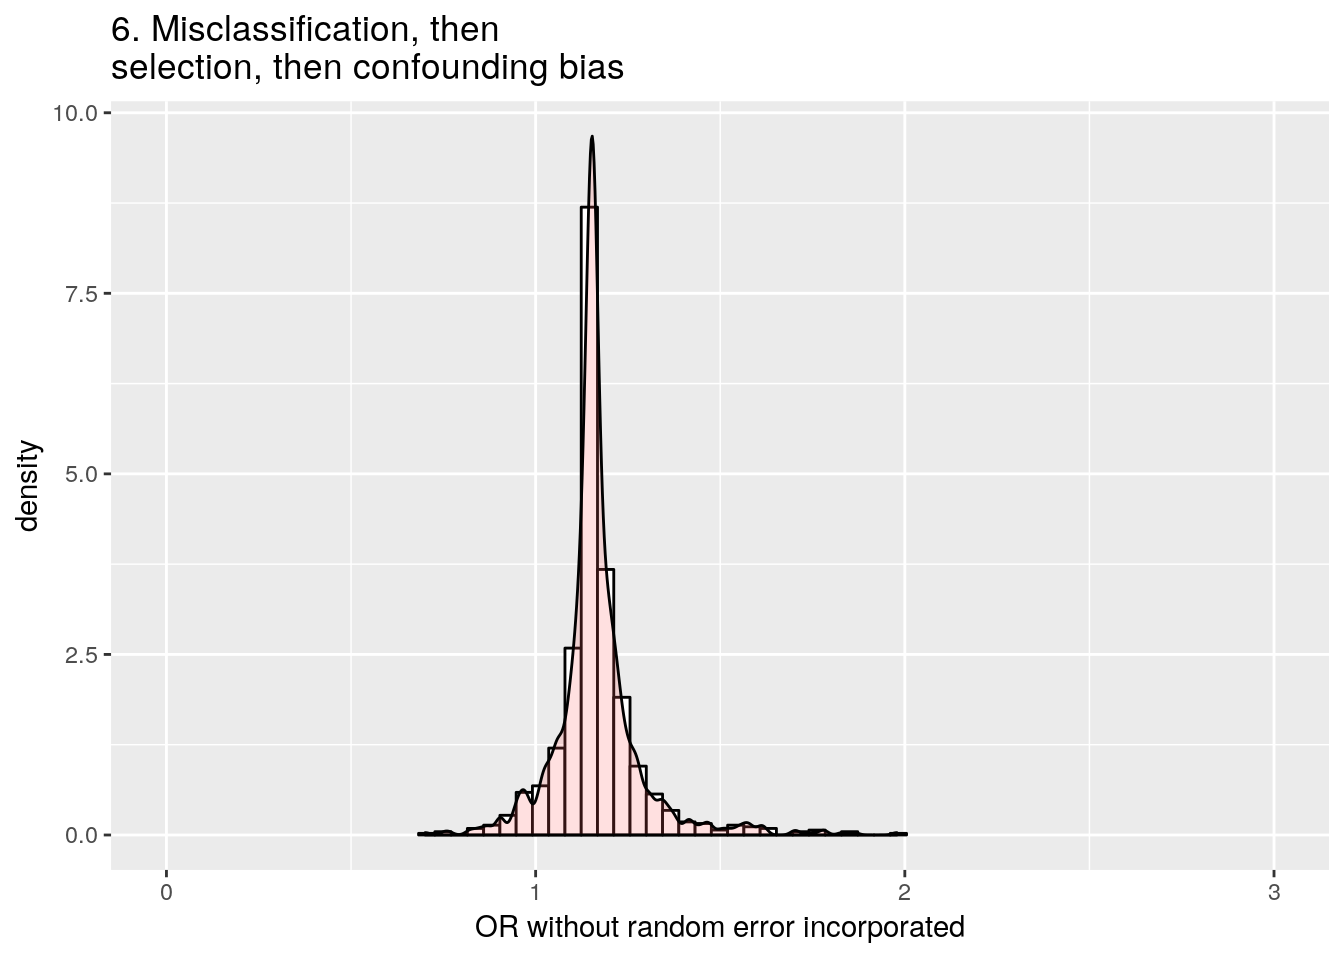 Misclassification followed by selection bias and then confounding bias.